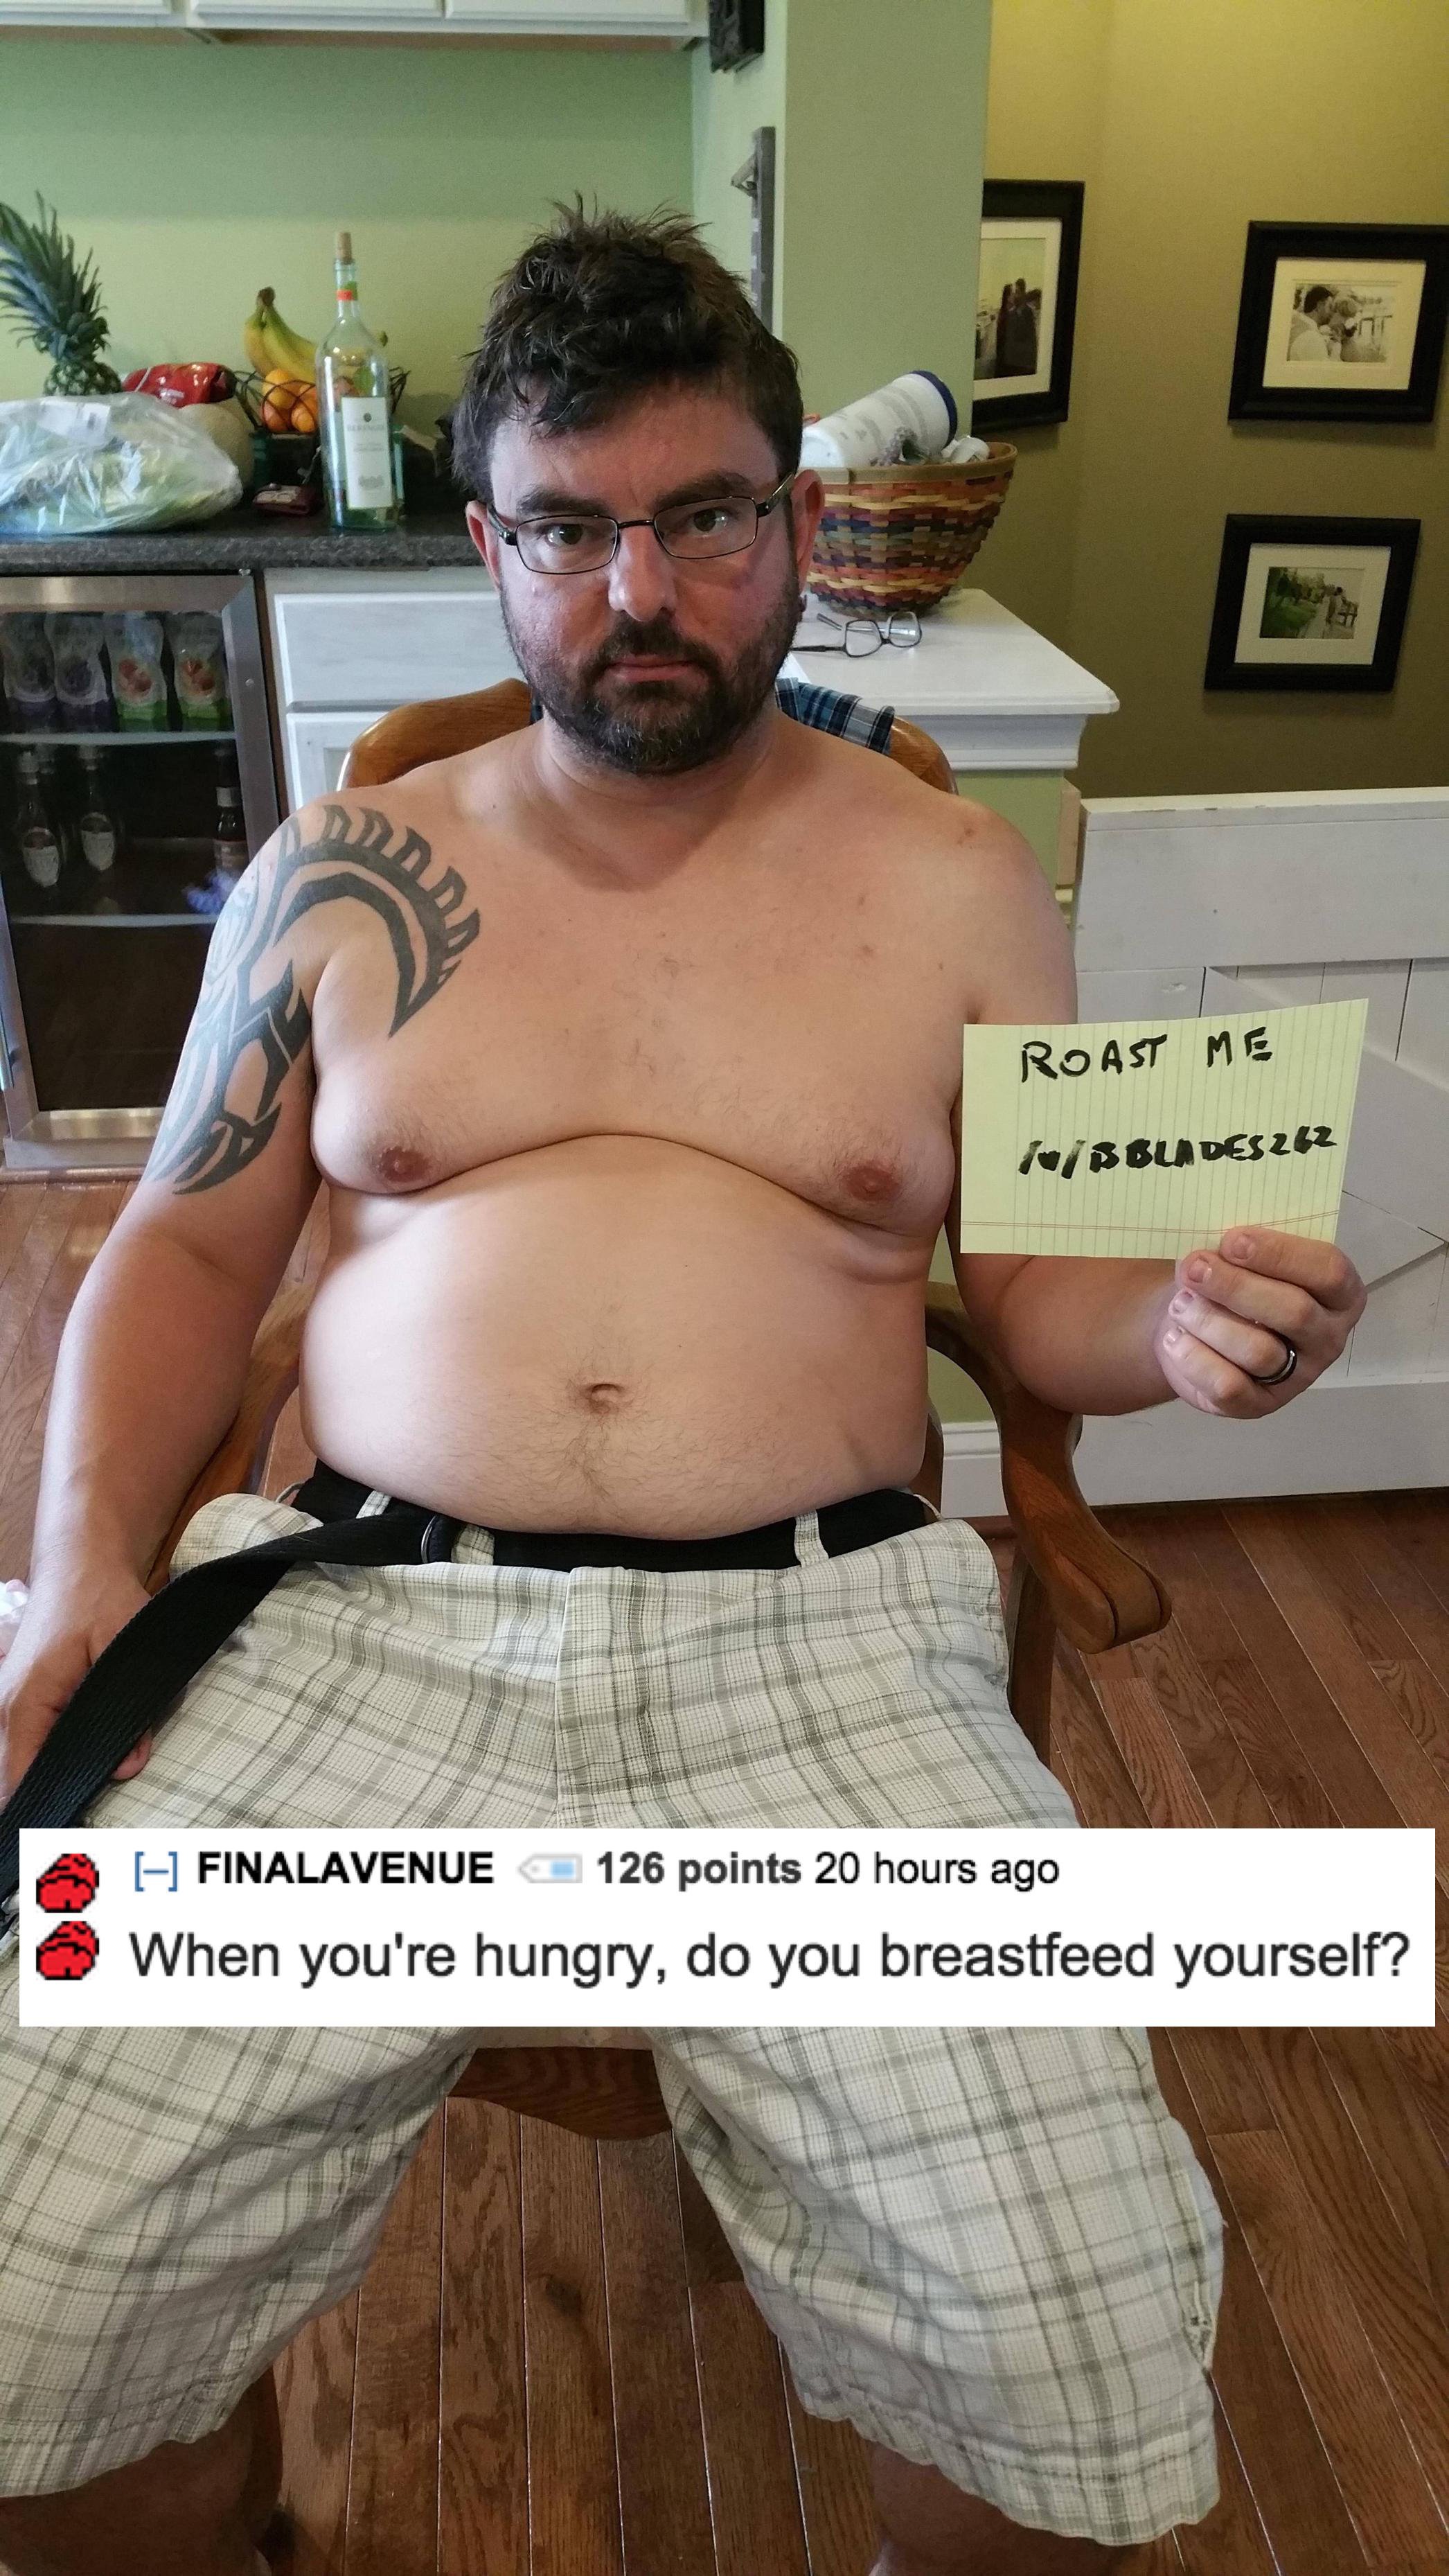 funny shirtless - Roast Me w 22 H Finalavenue 126 points 20 hours ago When you're hungry, do you breastfeed yourself?